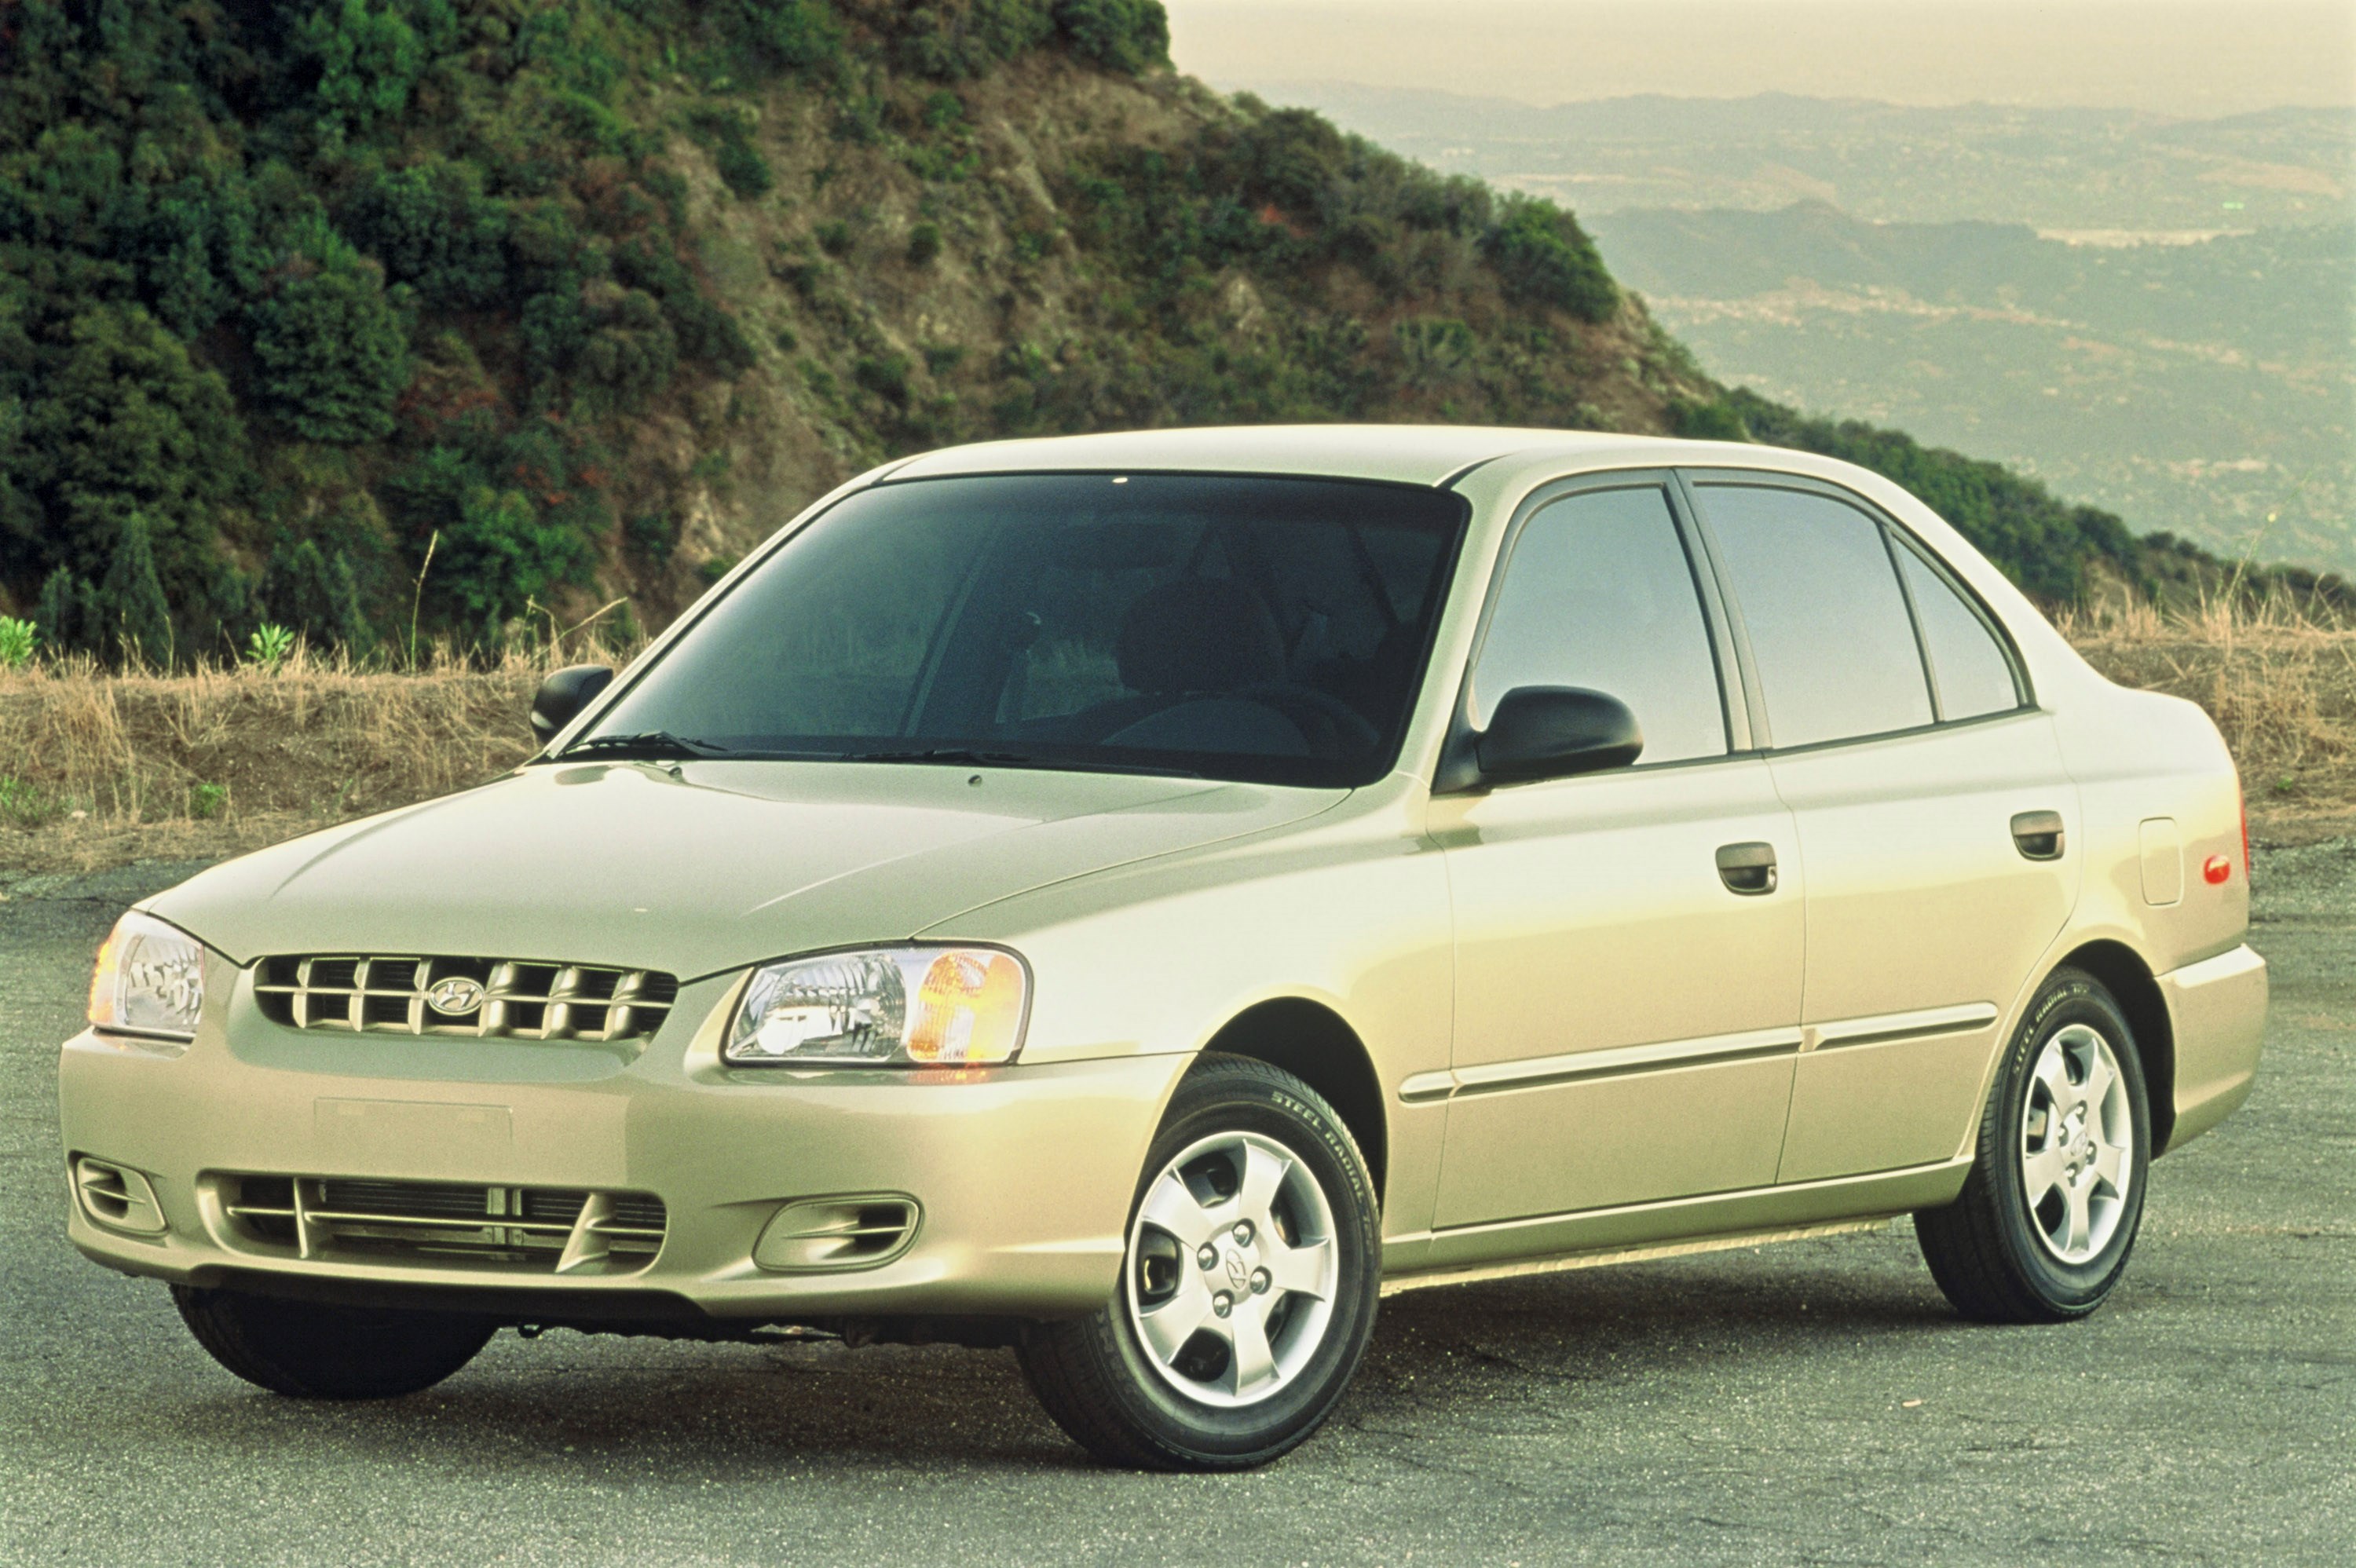 2000 Hyundai Accent HD Pictures